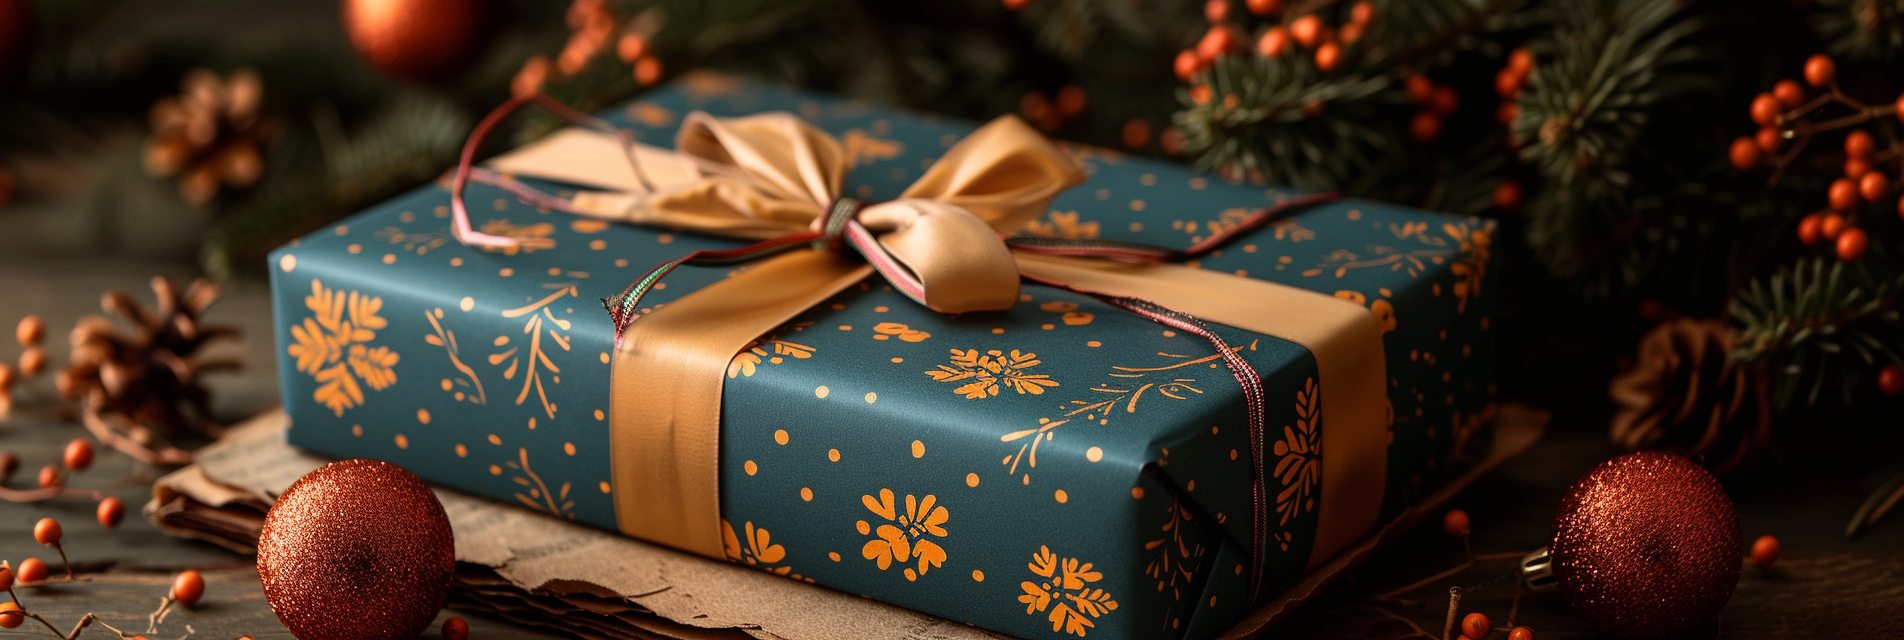 The Gift of Words: Unwrapping the Best Books for Christmas or Birthdays